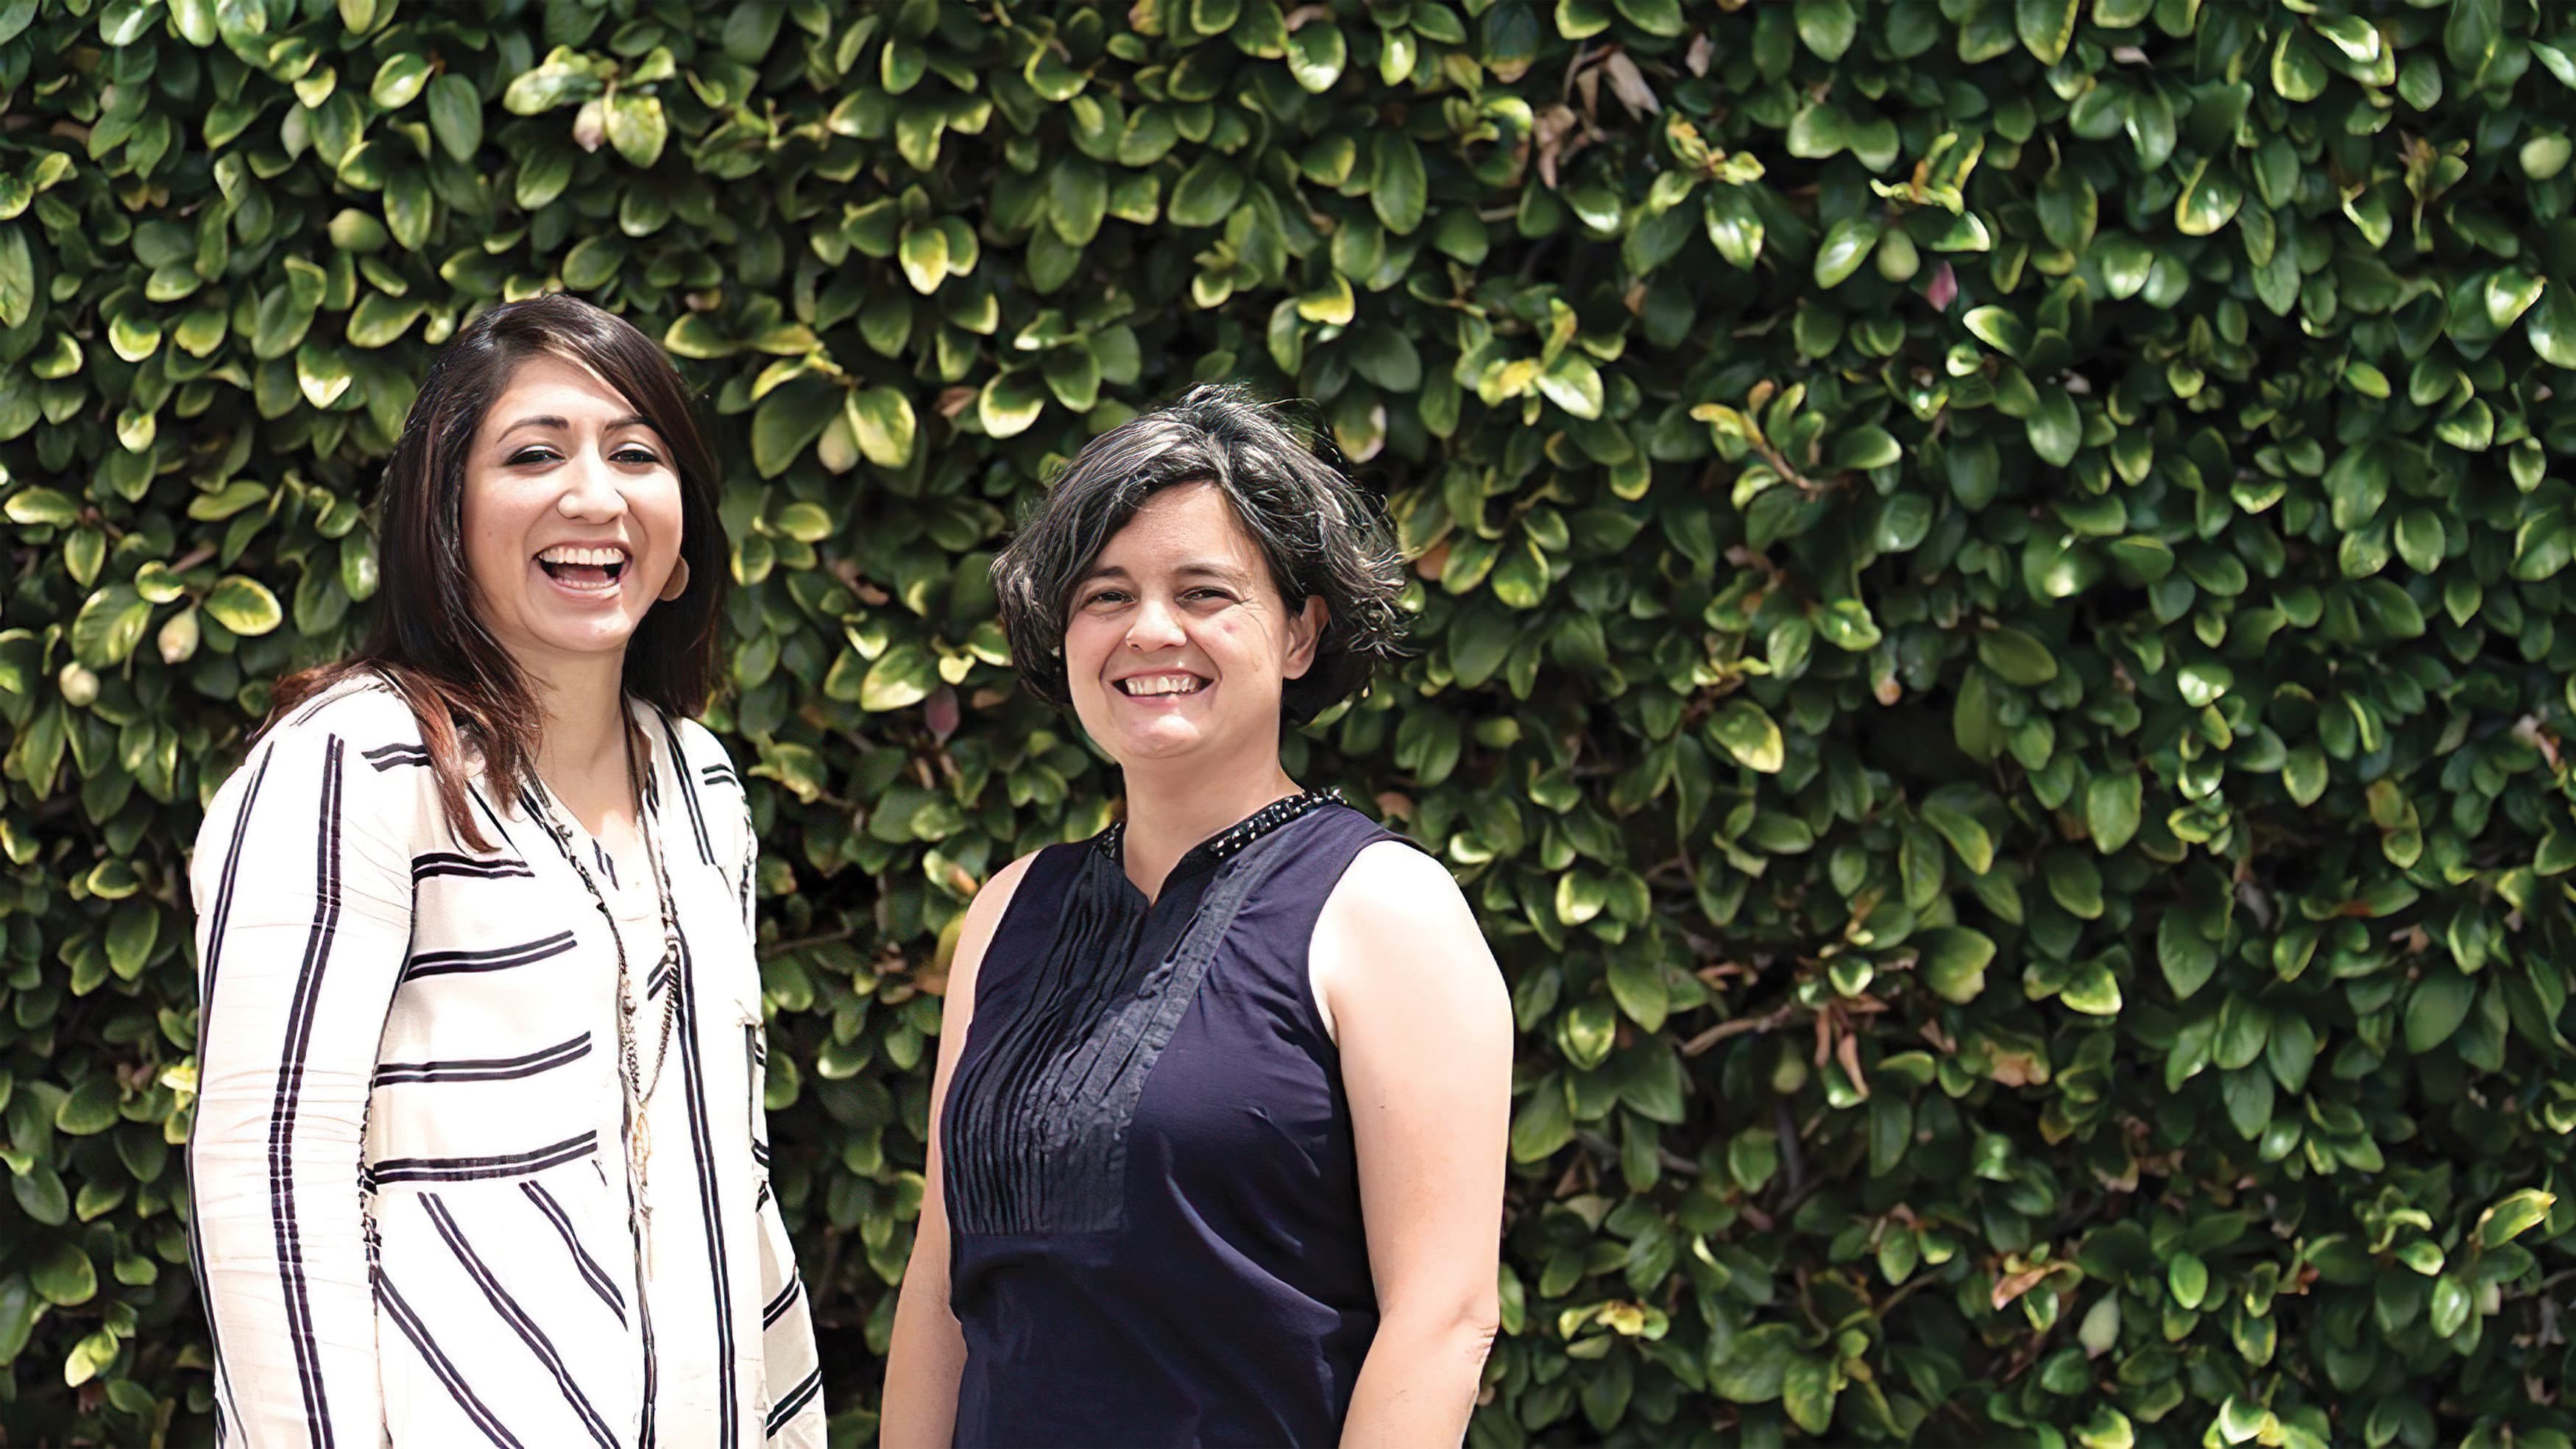 Christy Montgomery and Yolanda Sepulveda were both promoted within the ranks of RSM Design